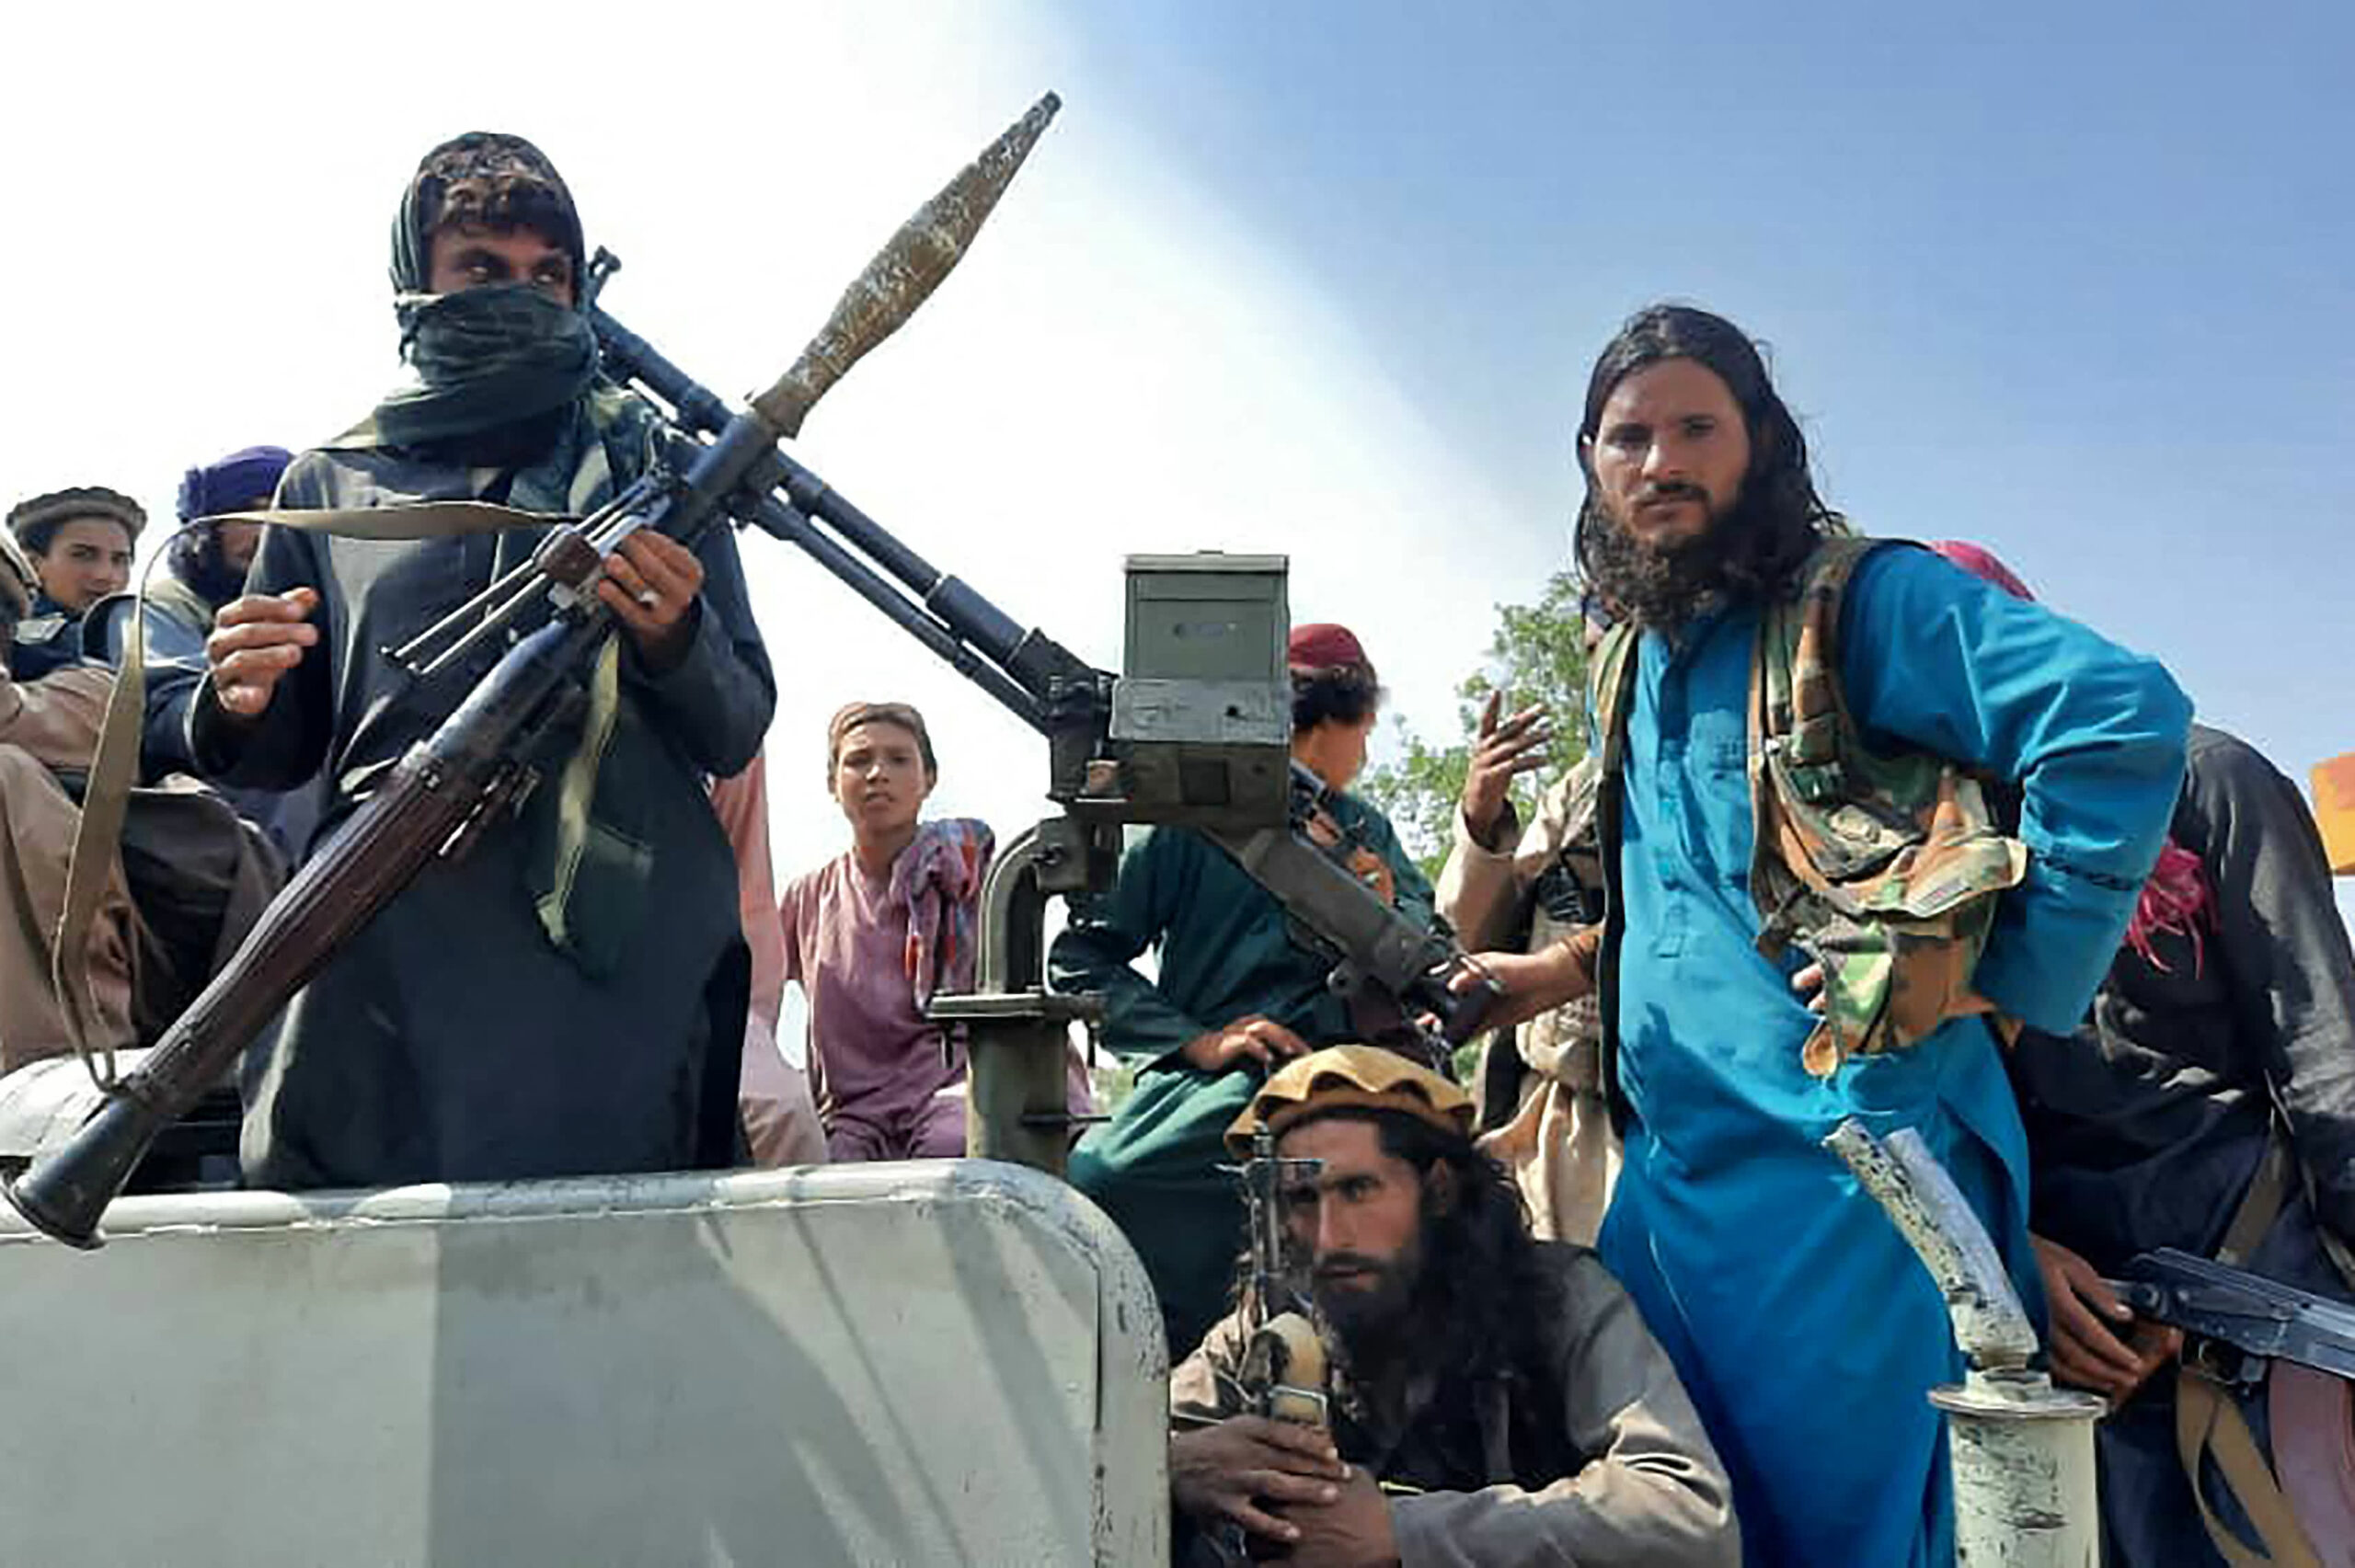 Taliban fighters sit over a vehicle on a street in Laghman province